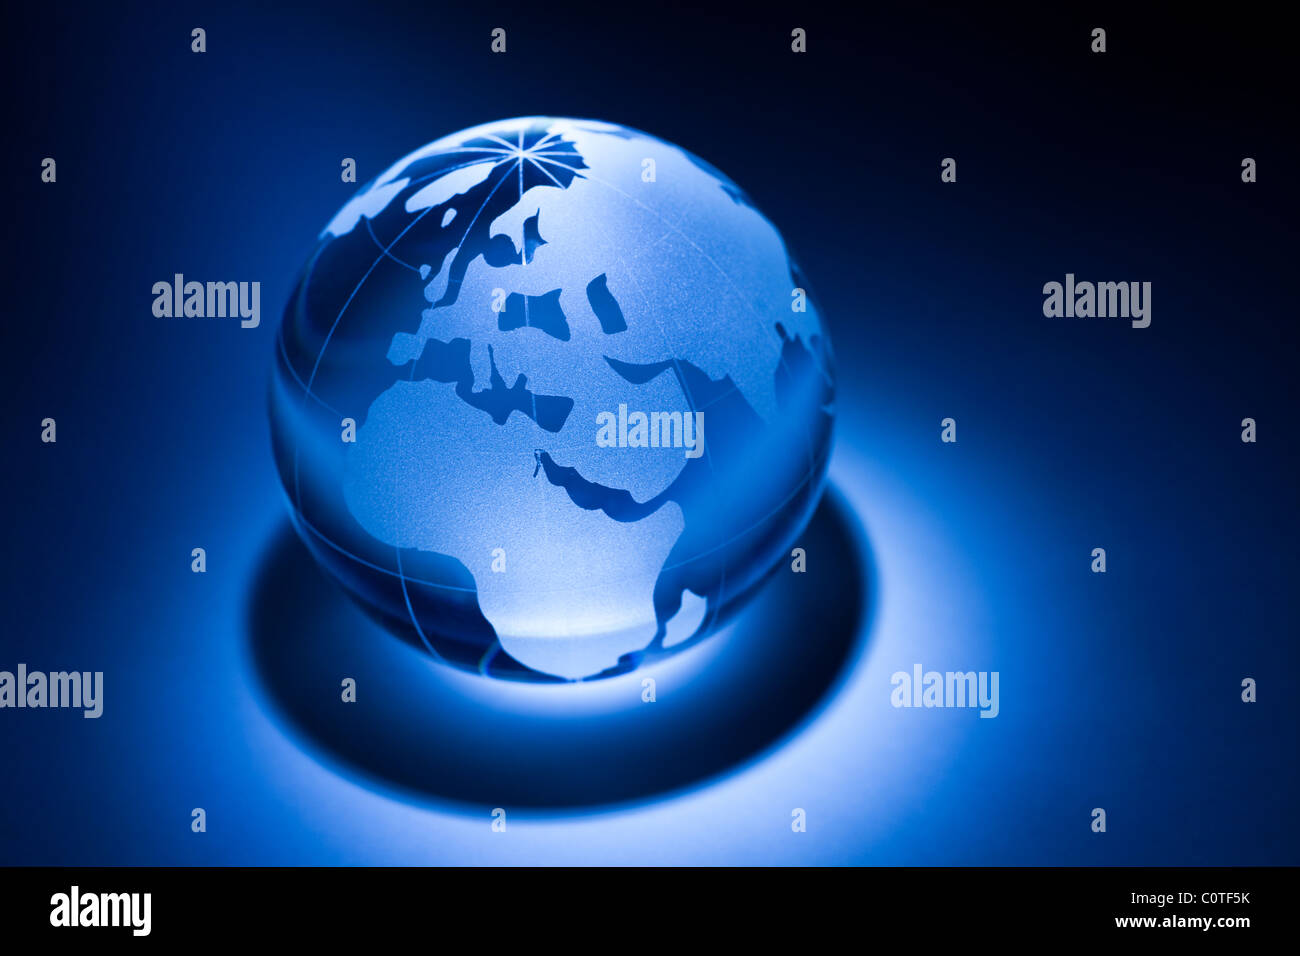 Earth planet,Transparent globe for background Stock Photo